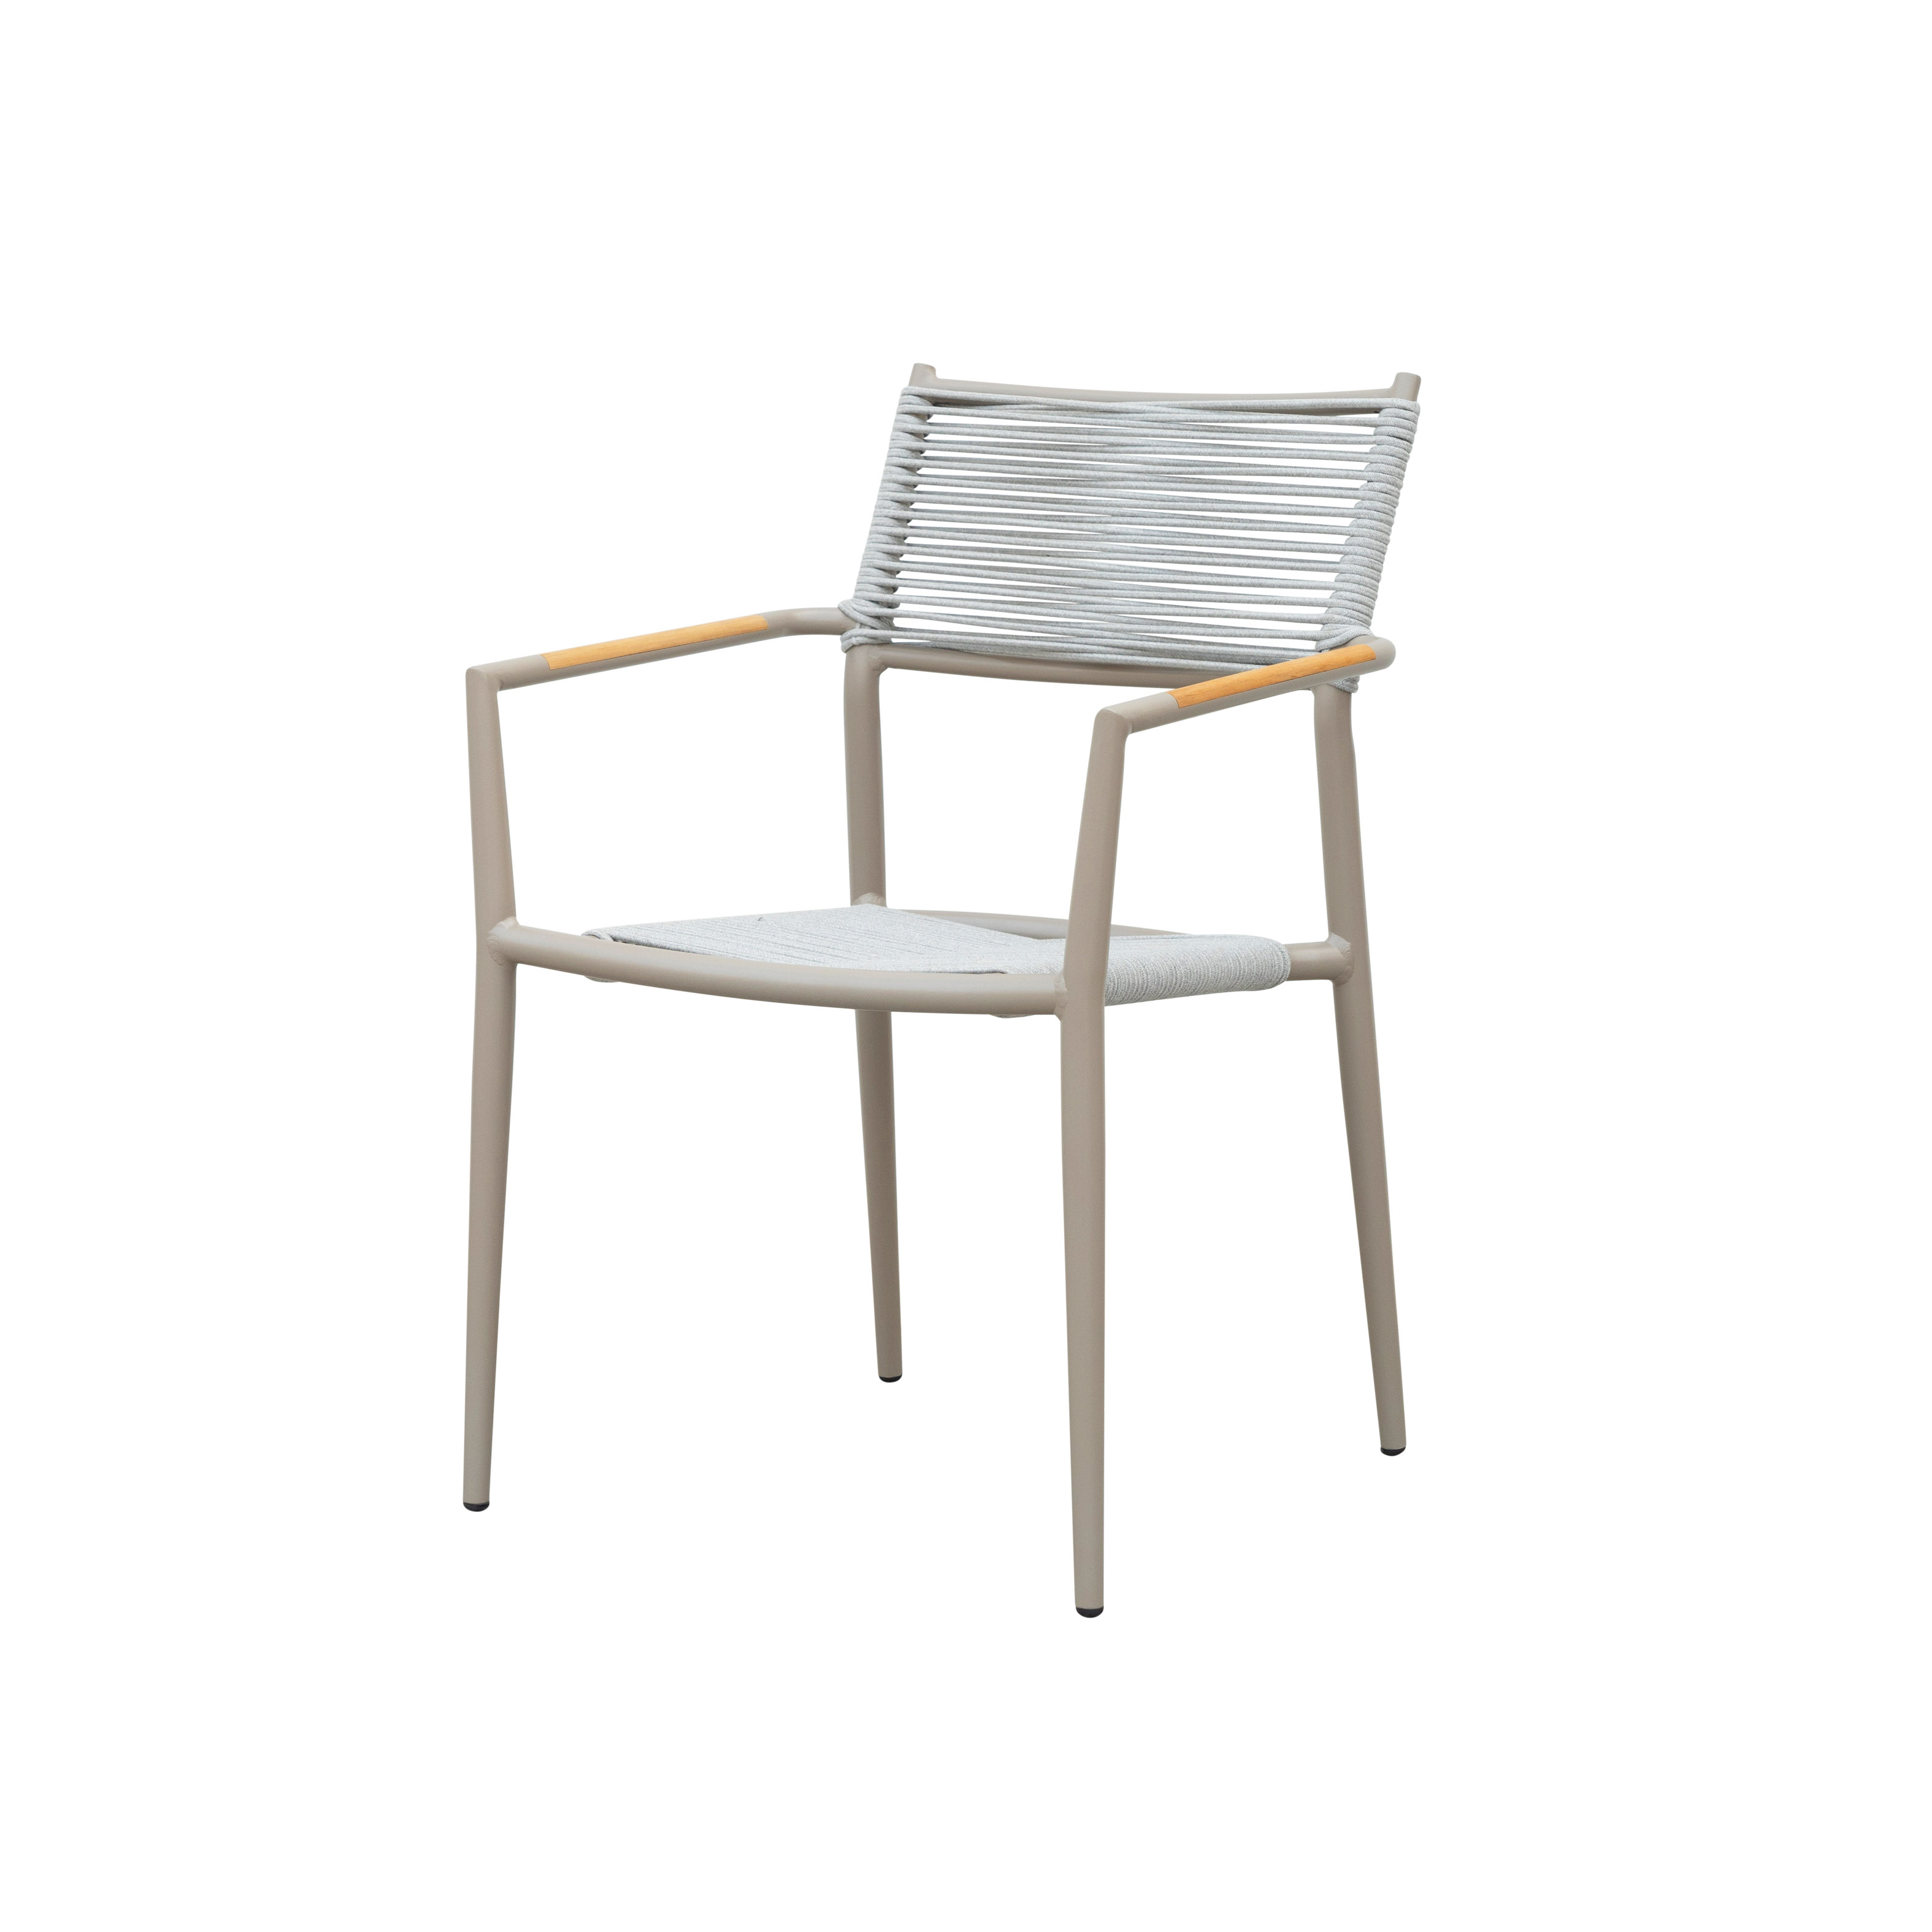 Romeo rope dining chair S2